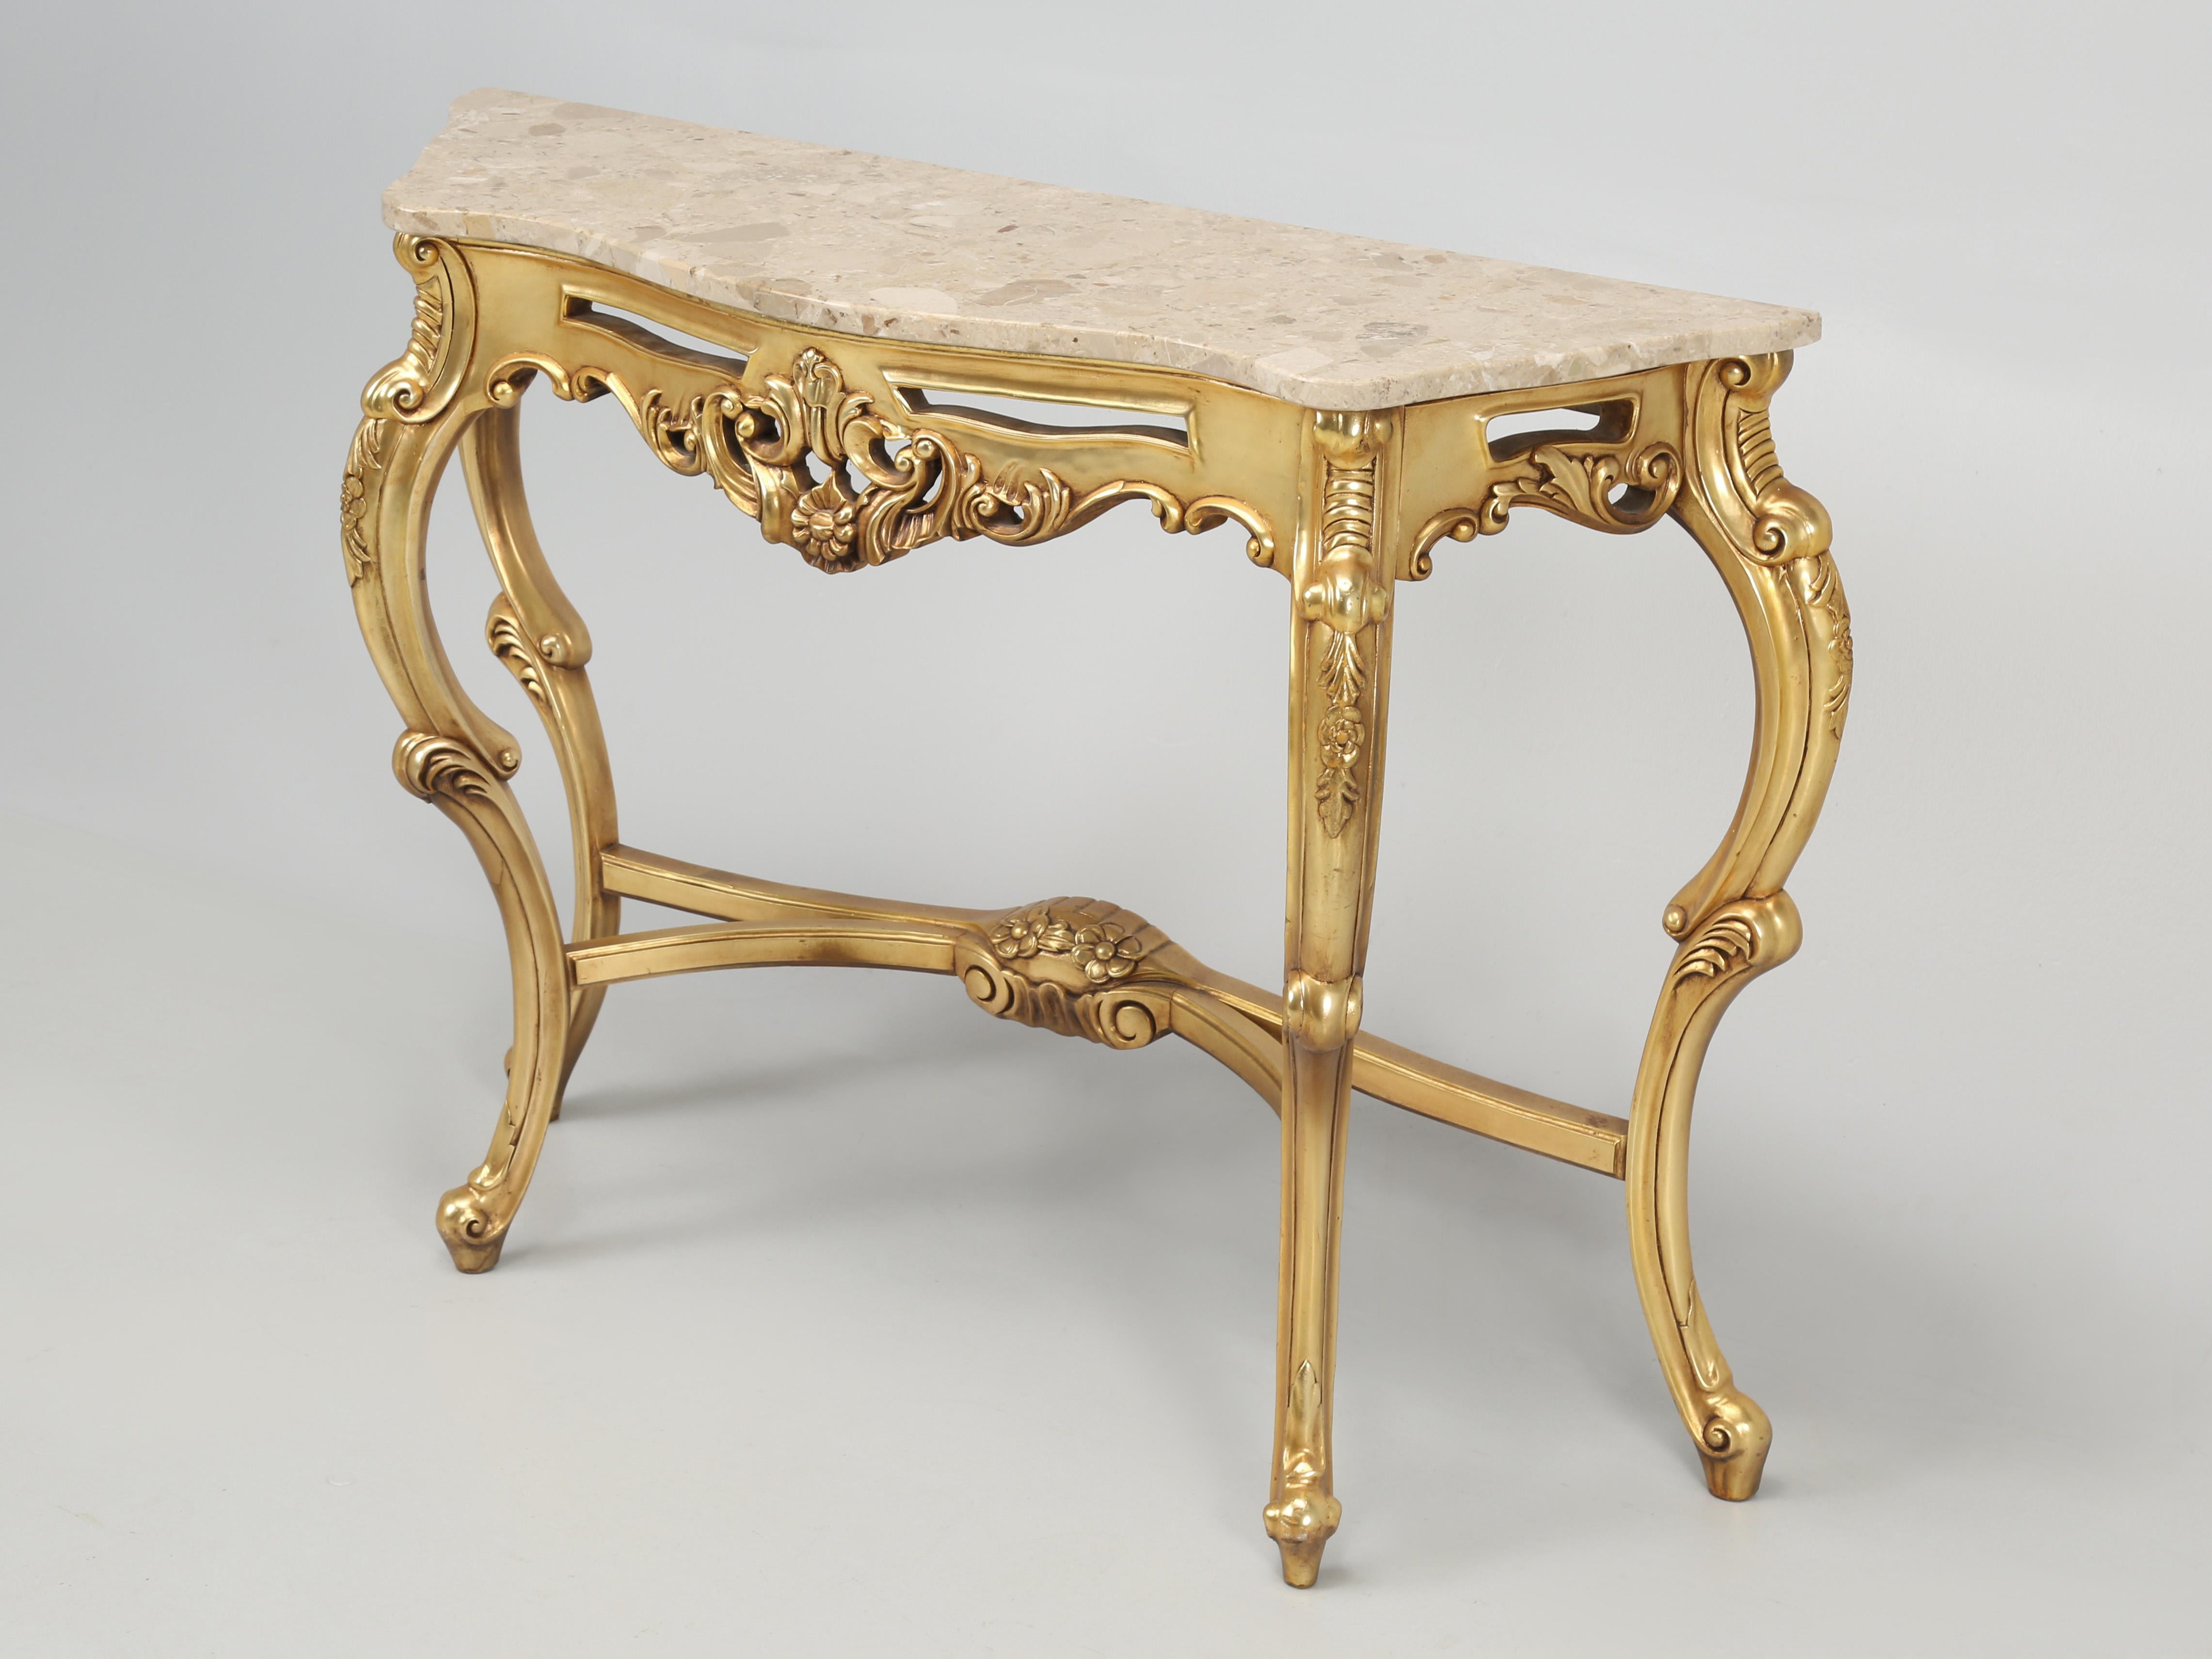 French style Rococo gilt console table with a marble top. Because this French inspired gilt console table came from another dealers stock, unfortunately we have no accurate history. Our hypothesis says that the French console table was produced off